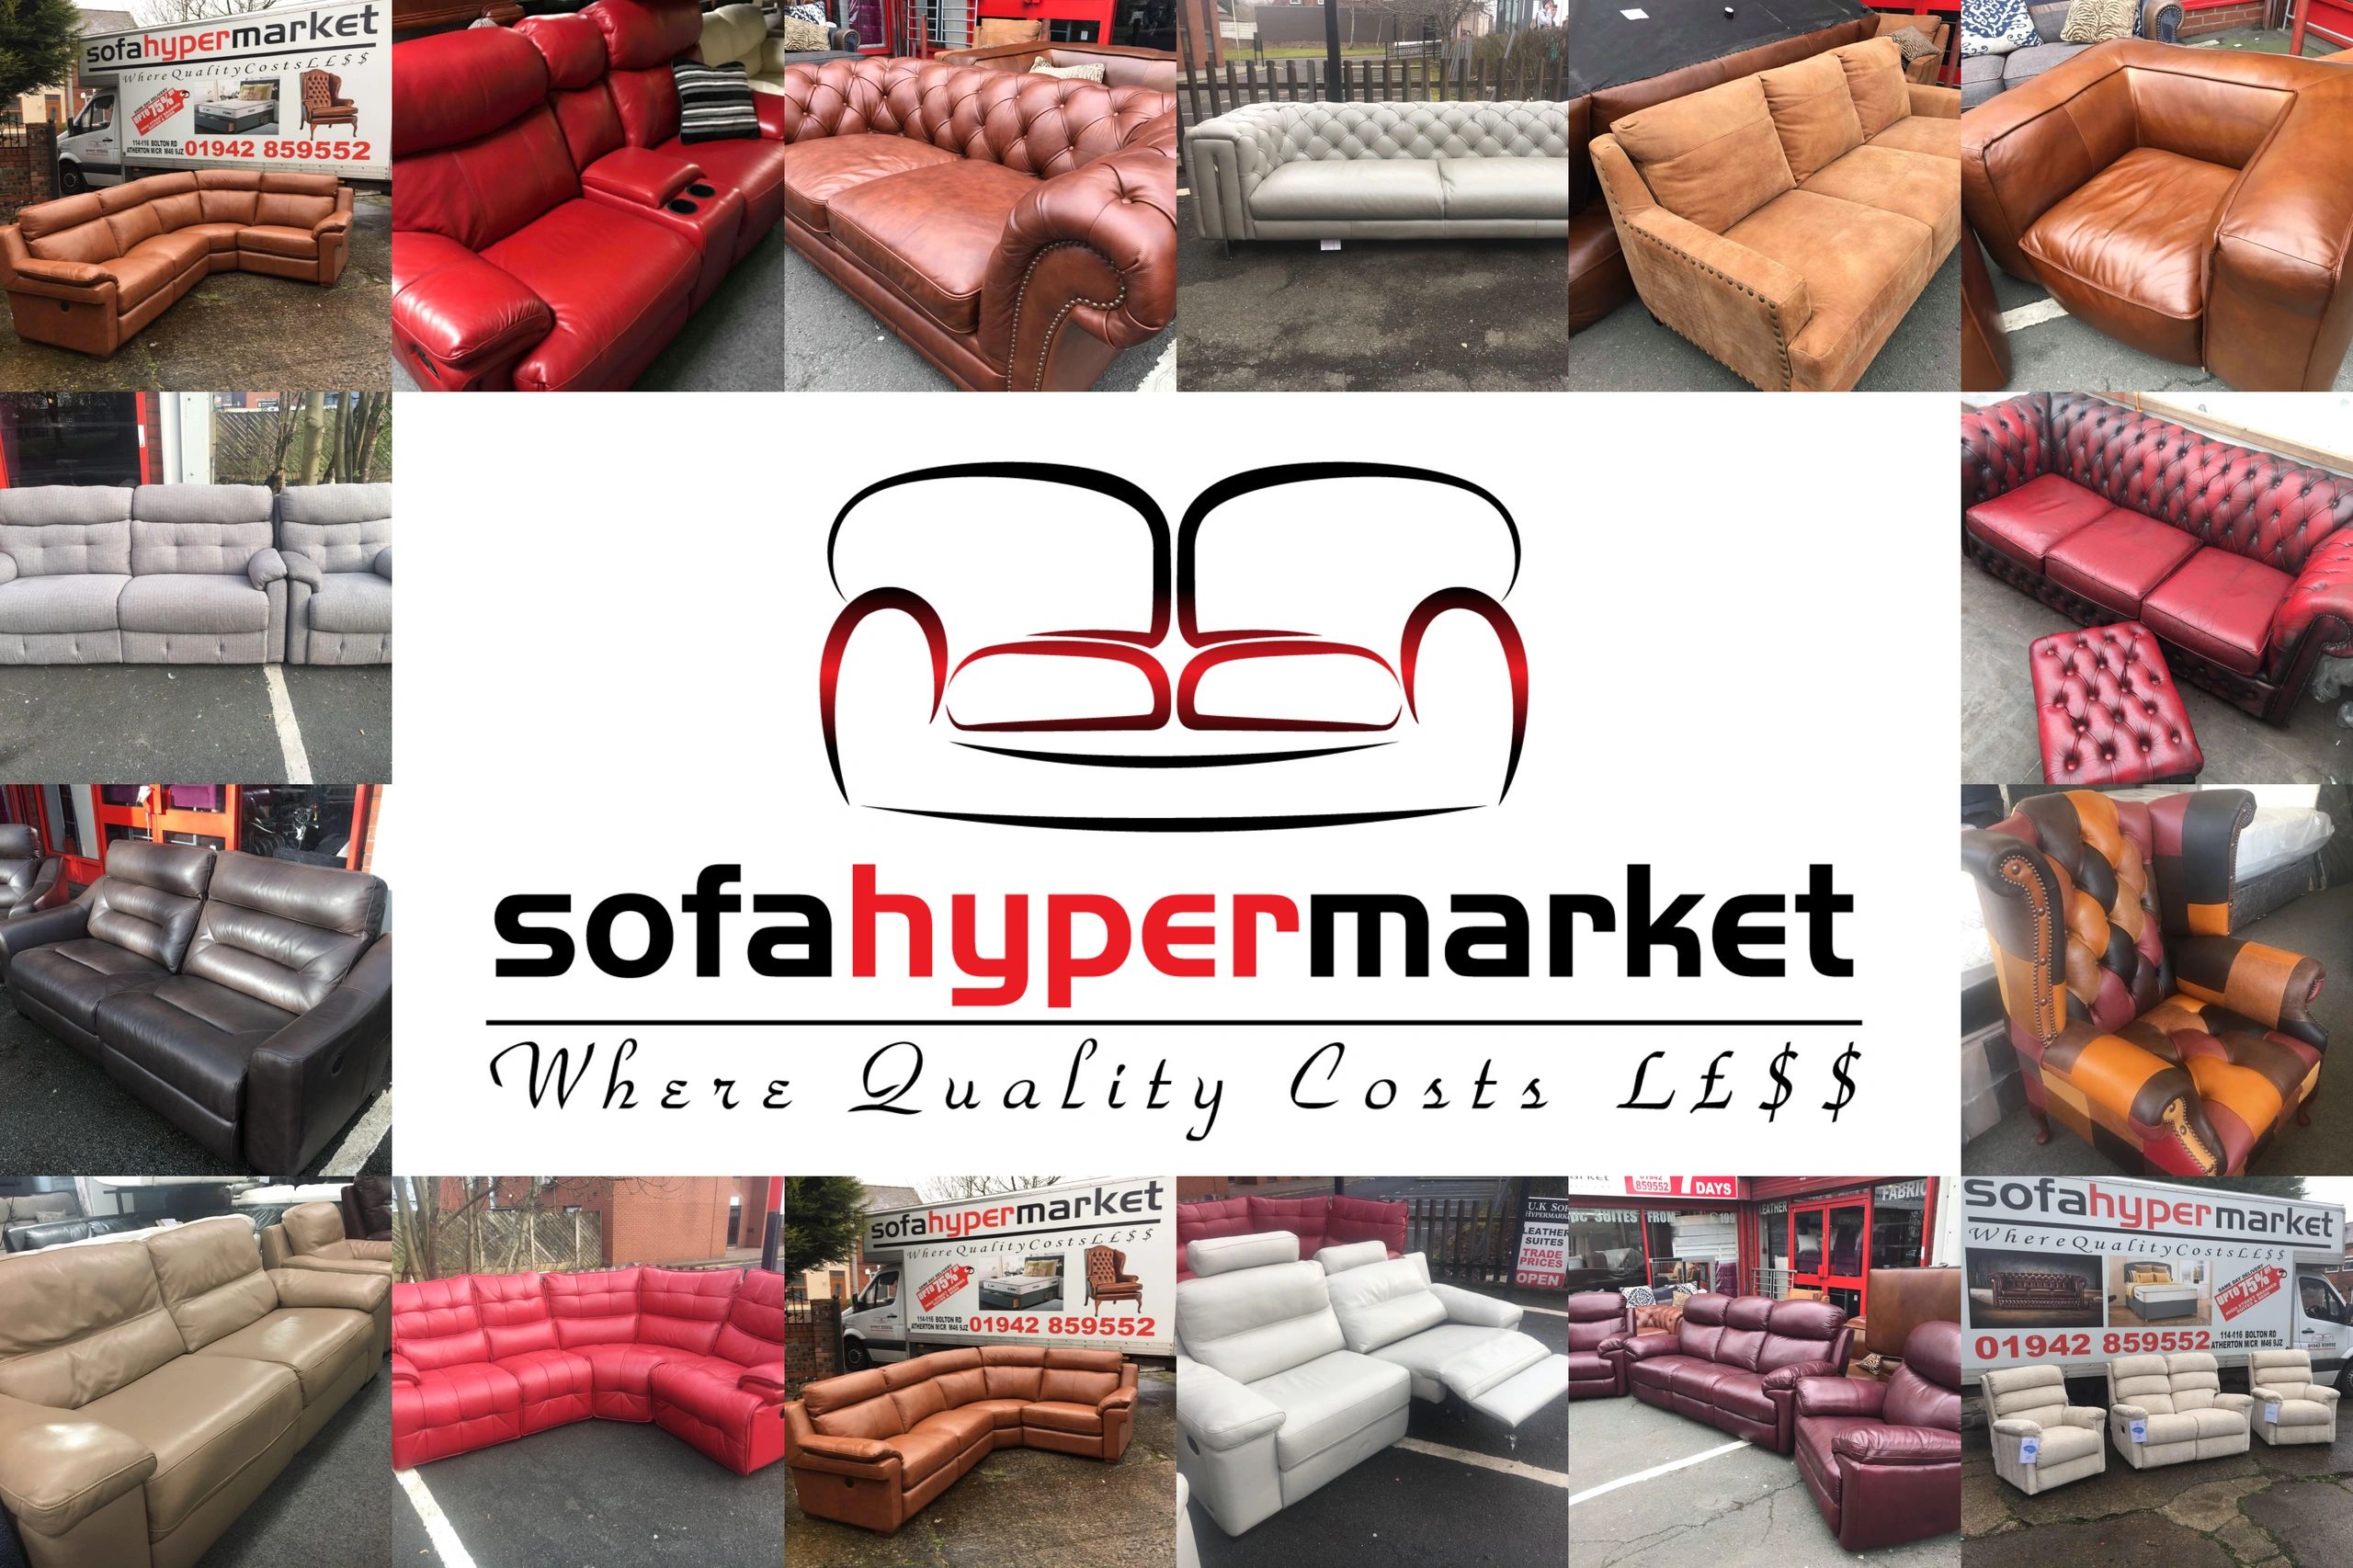 The Sofahypermarket - Sofas and Beds, Furniture Bolton